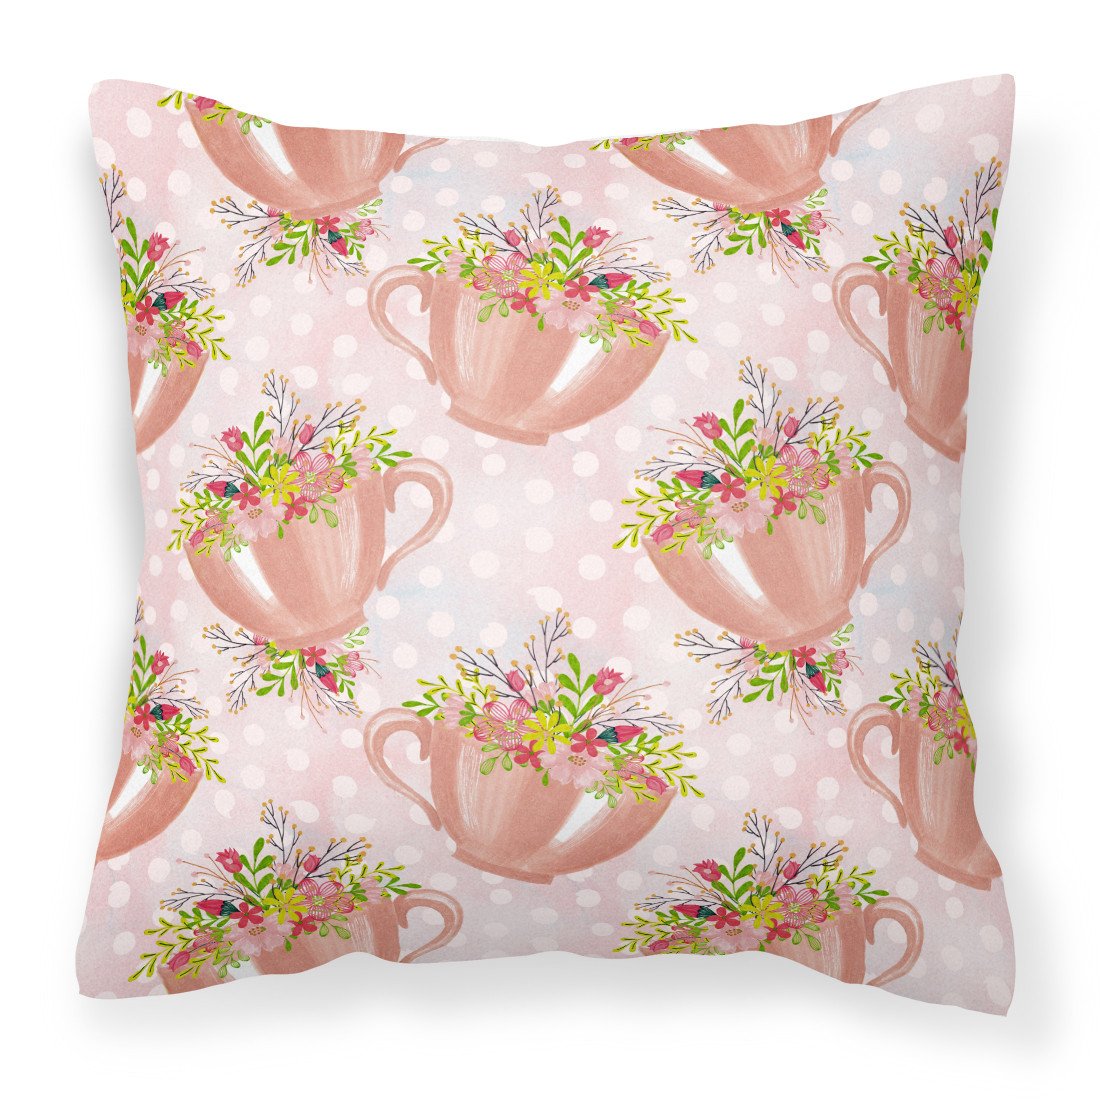 Tea Cup and Flowers Pink Fabric Decorative Pillow BB7481PW1818 by Caroline's Treasures